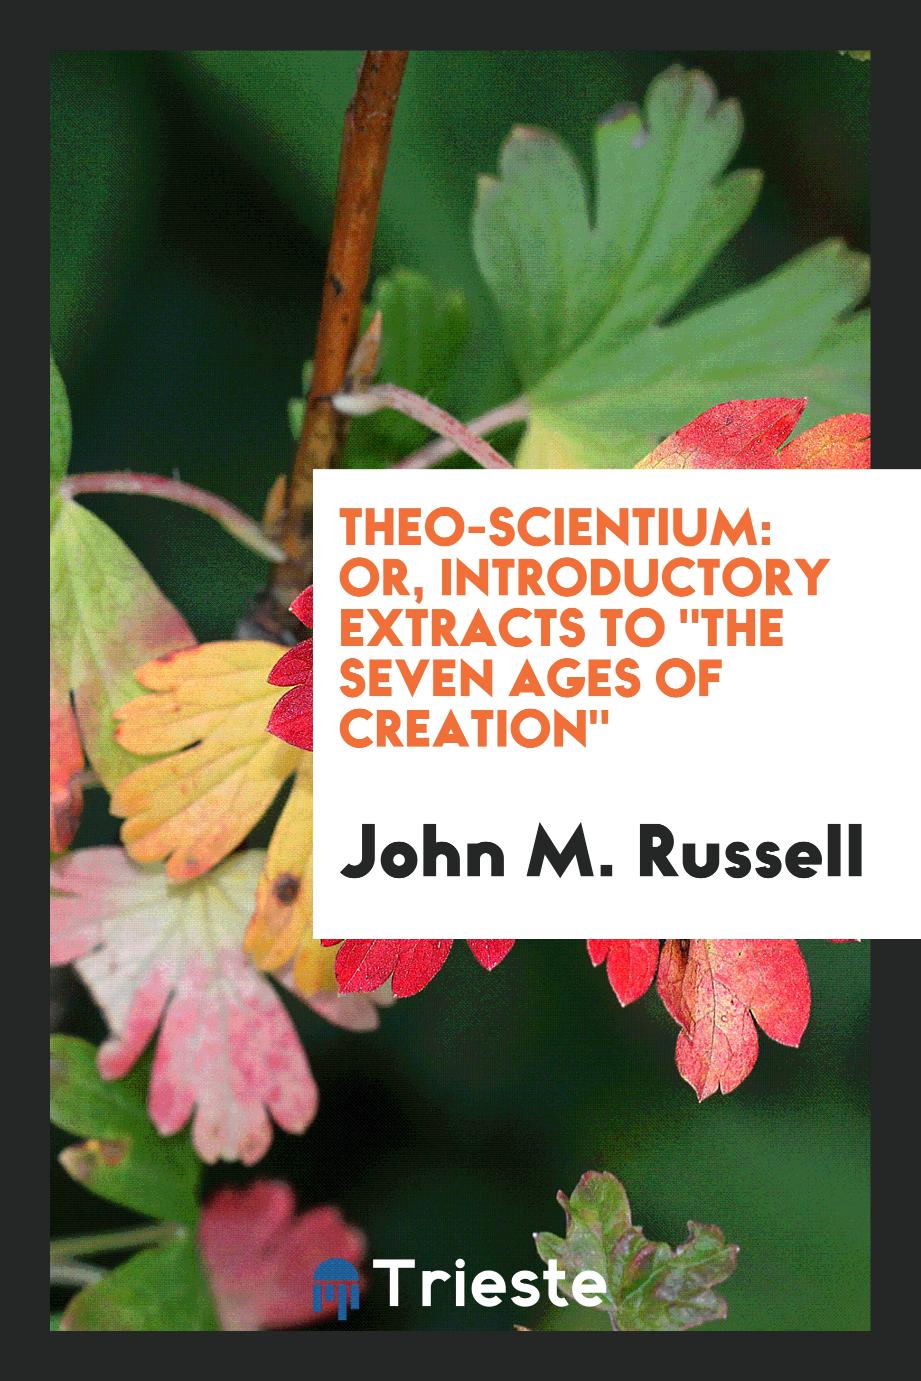 Theo-Scientium: Or, Introductory Extracts to "The Seven Ages of Creation"